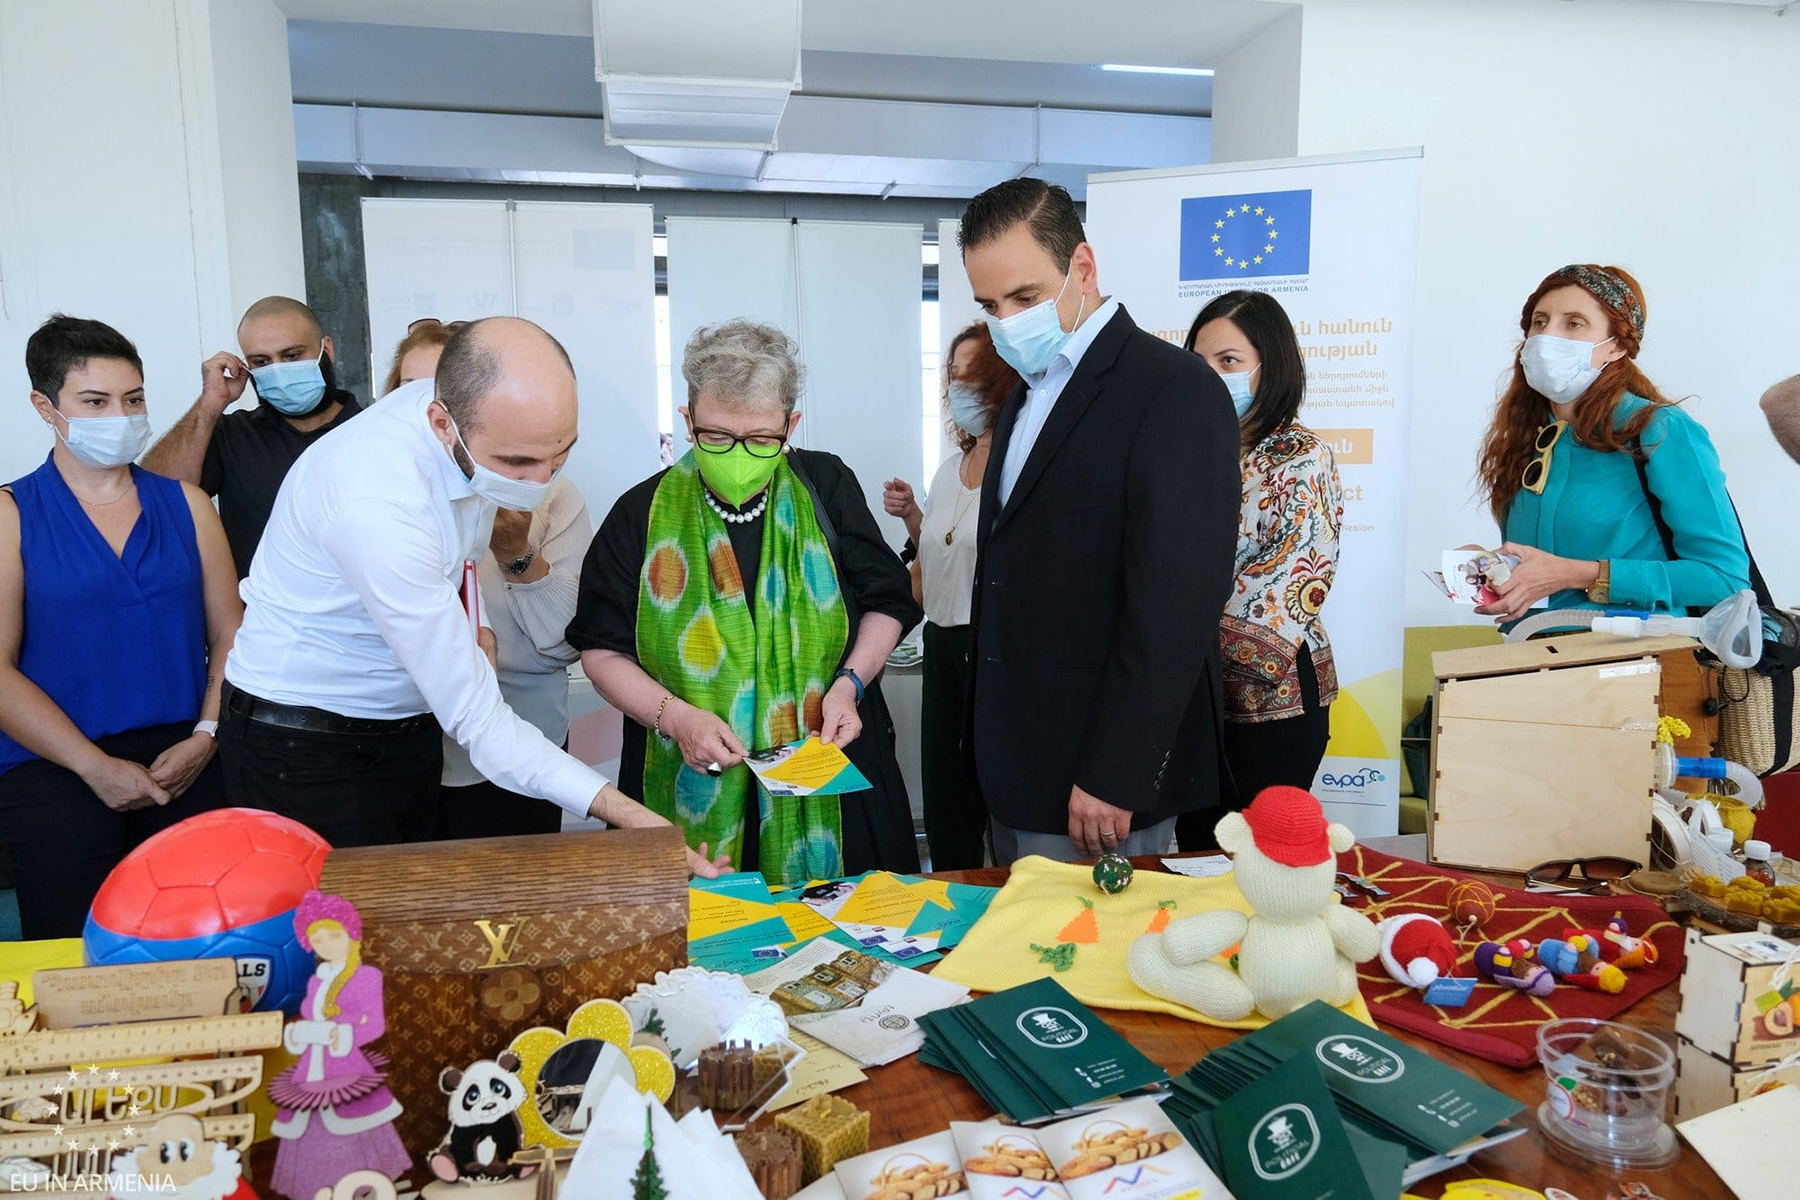 Financial support to social business: The EU-Supported COVID-19 Relief Fund provided grants to 35 local companies